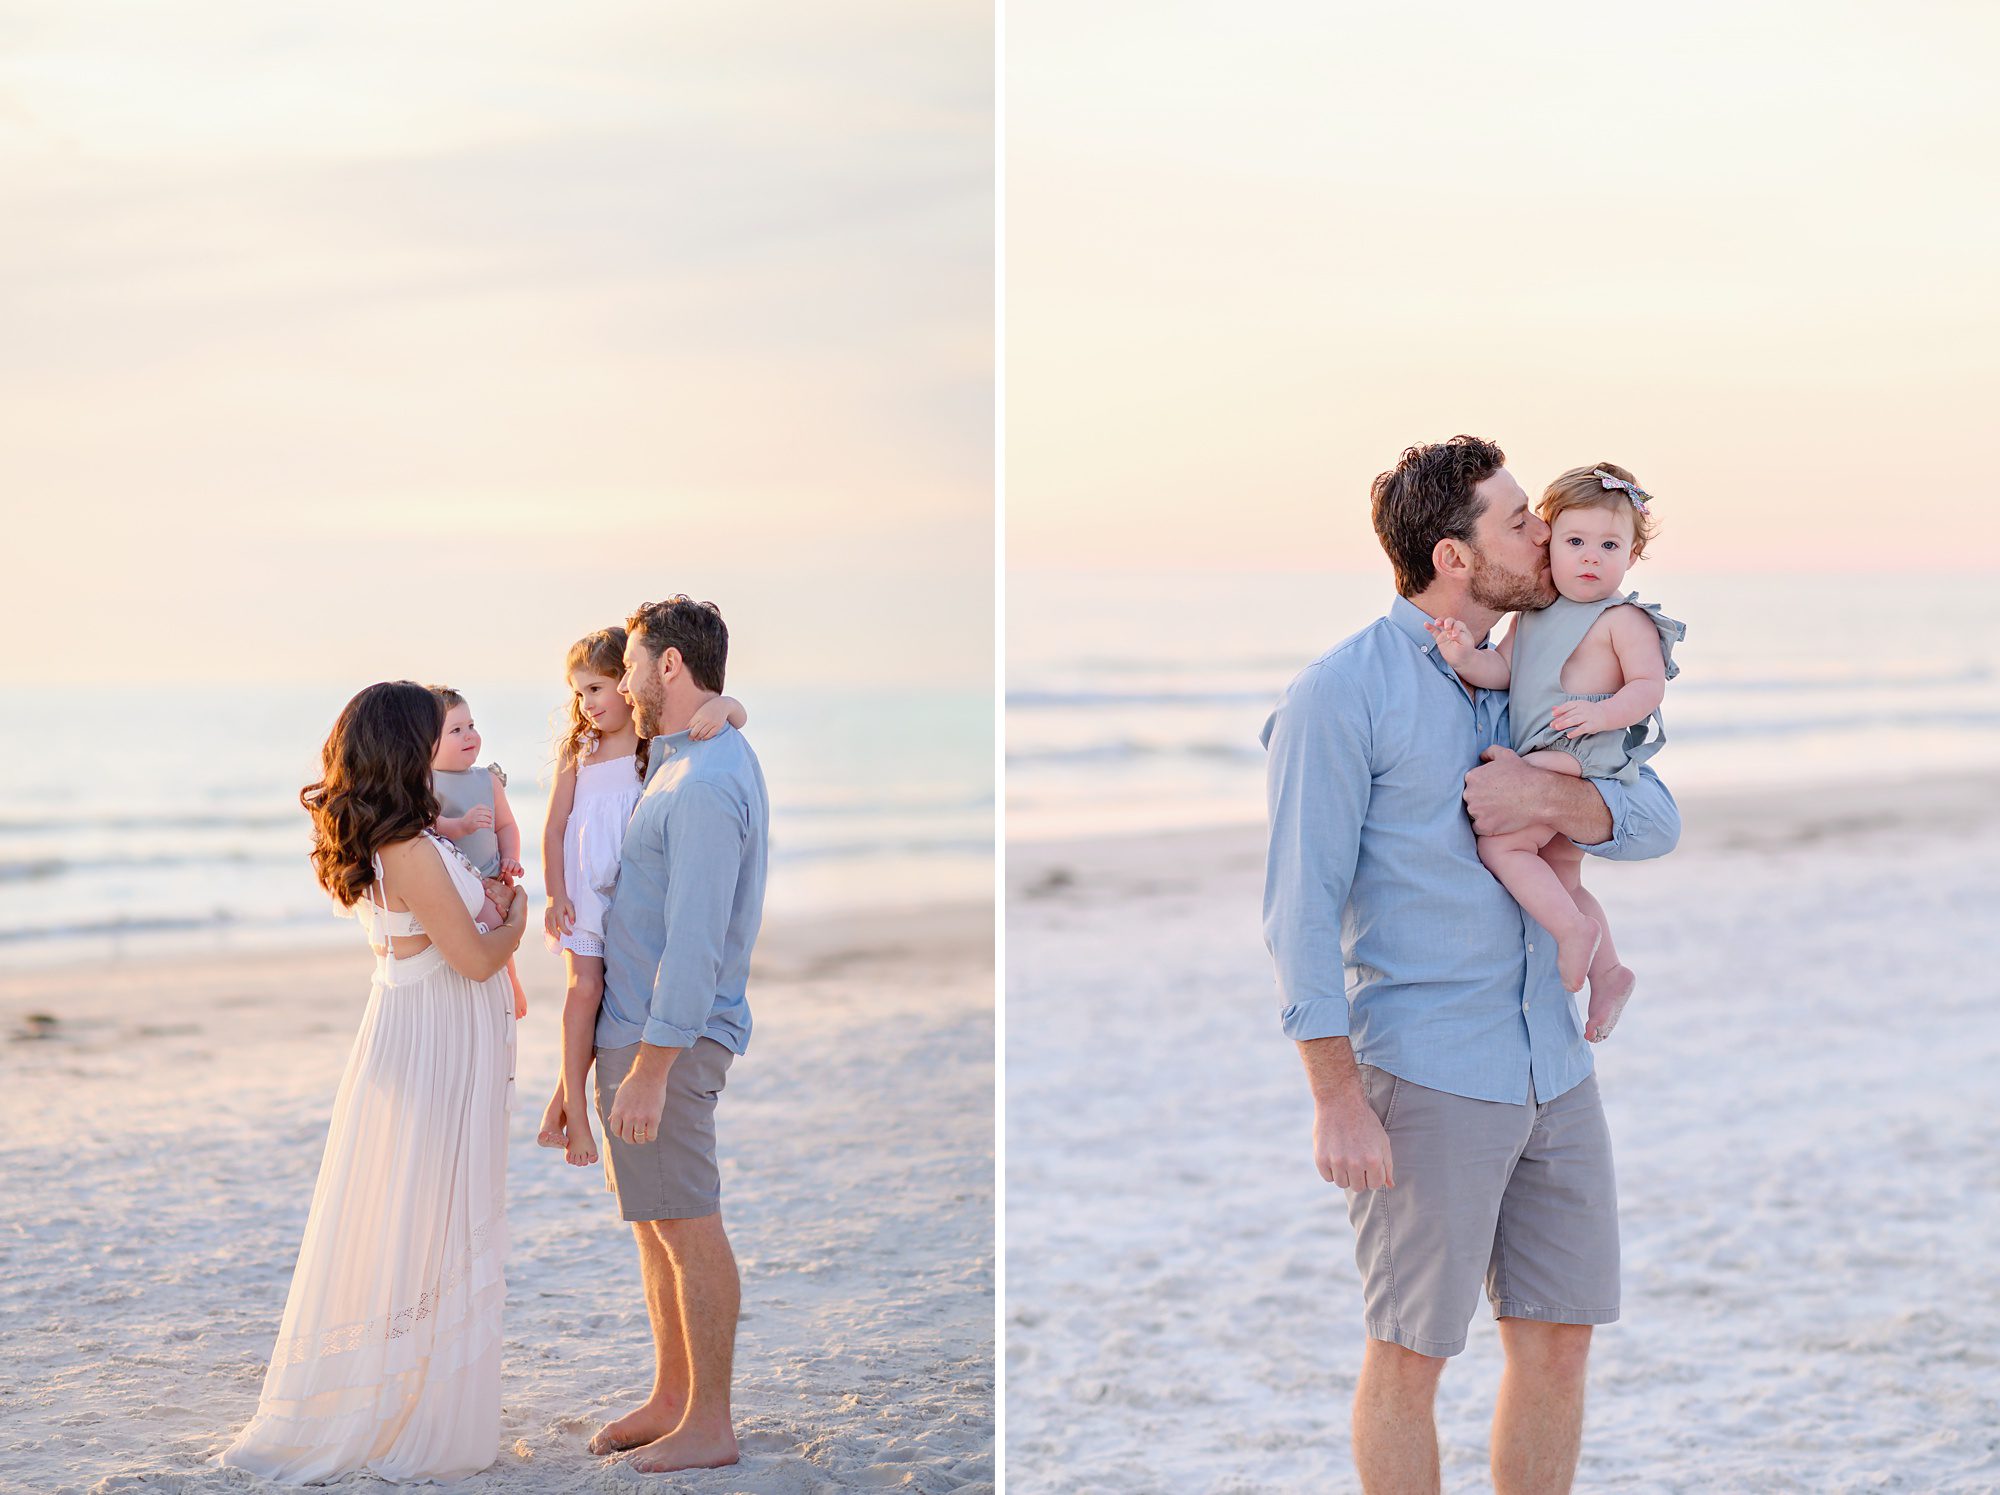 Family of four gets beach maternity portraits at sunset to celebrate their 3rd child on the way. 